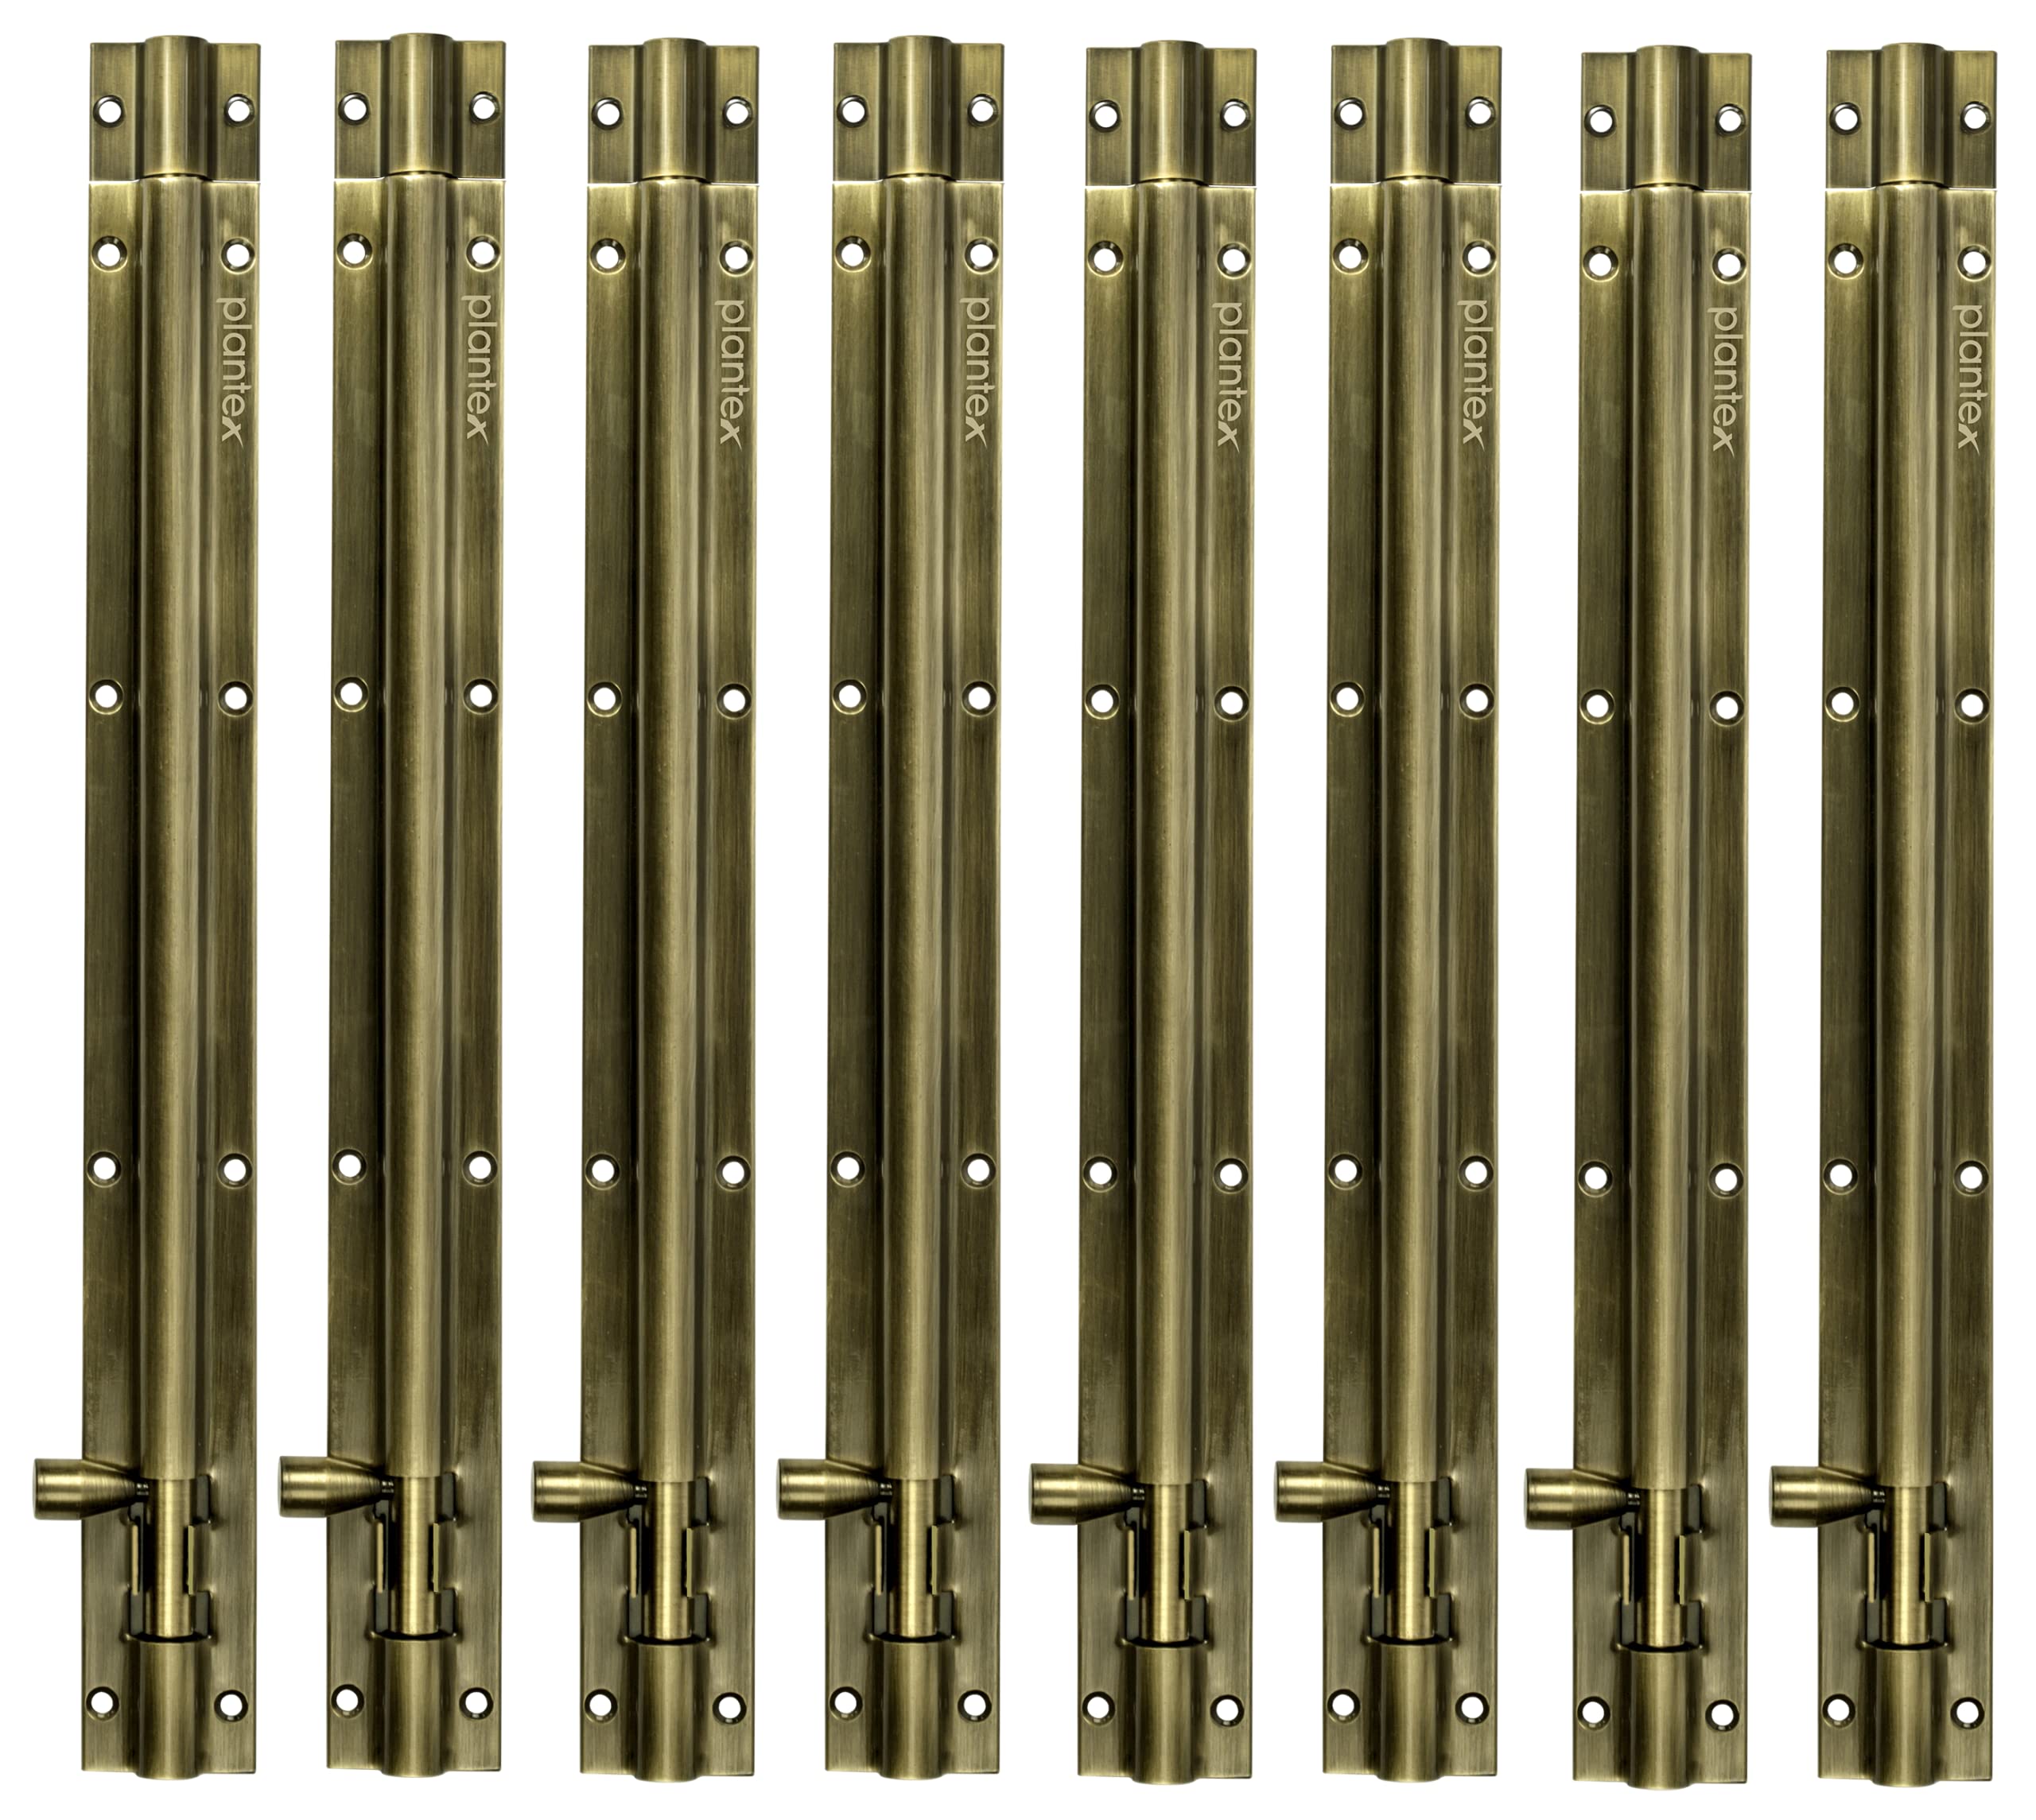 Plantex Antique Tower Bolt for Windows/Doors/Wardrobe - 12-inches (Pack of 8)